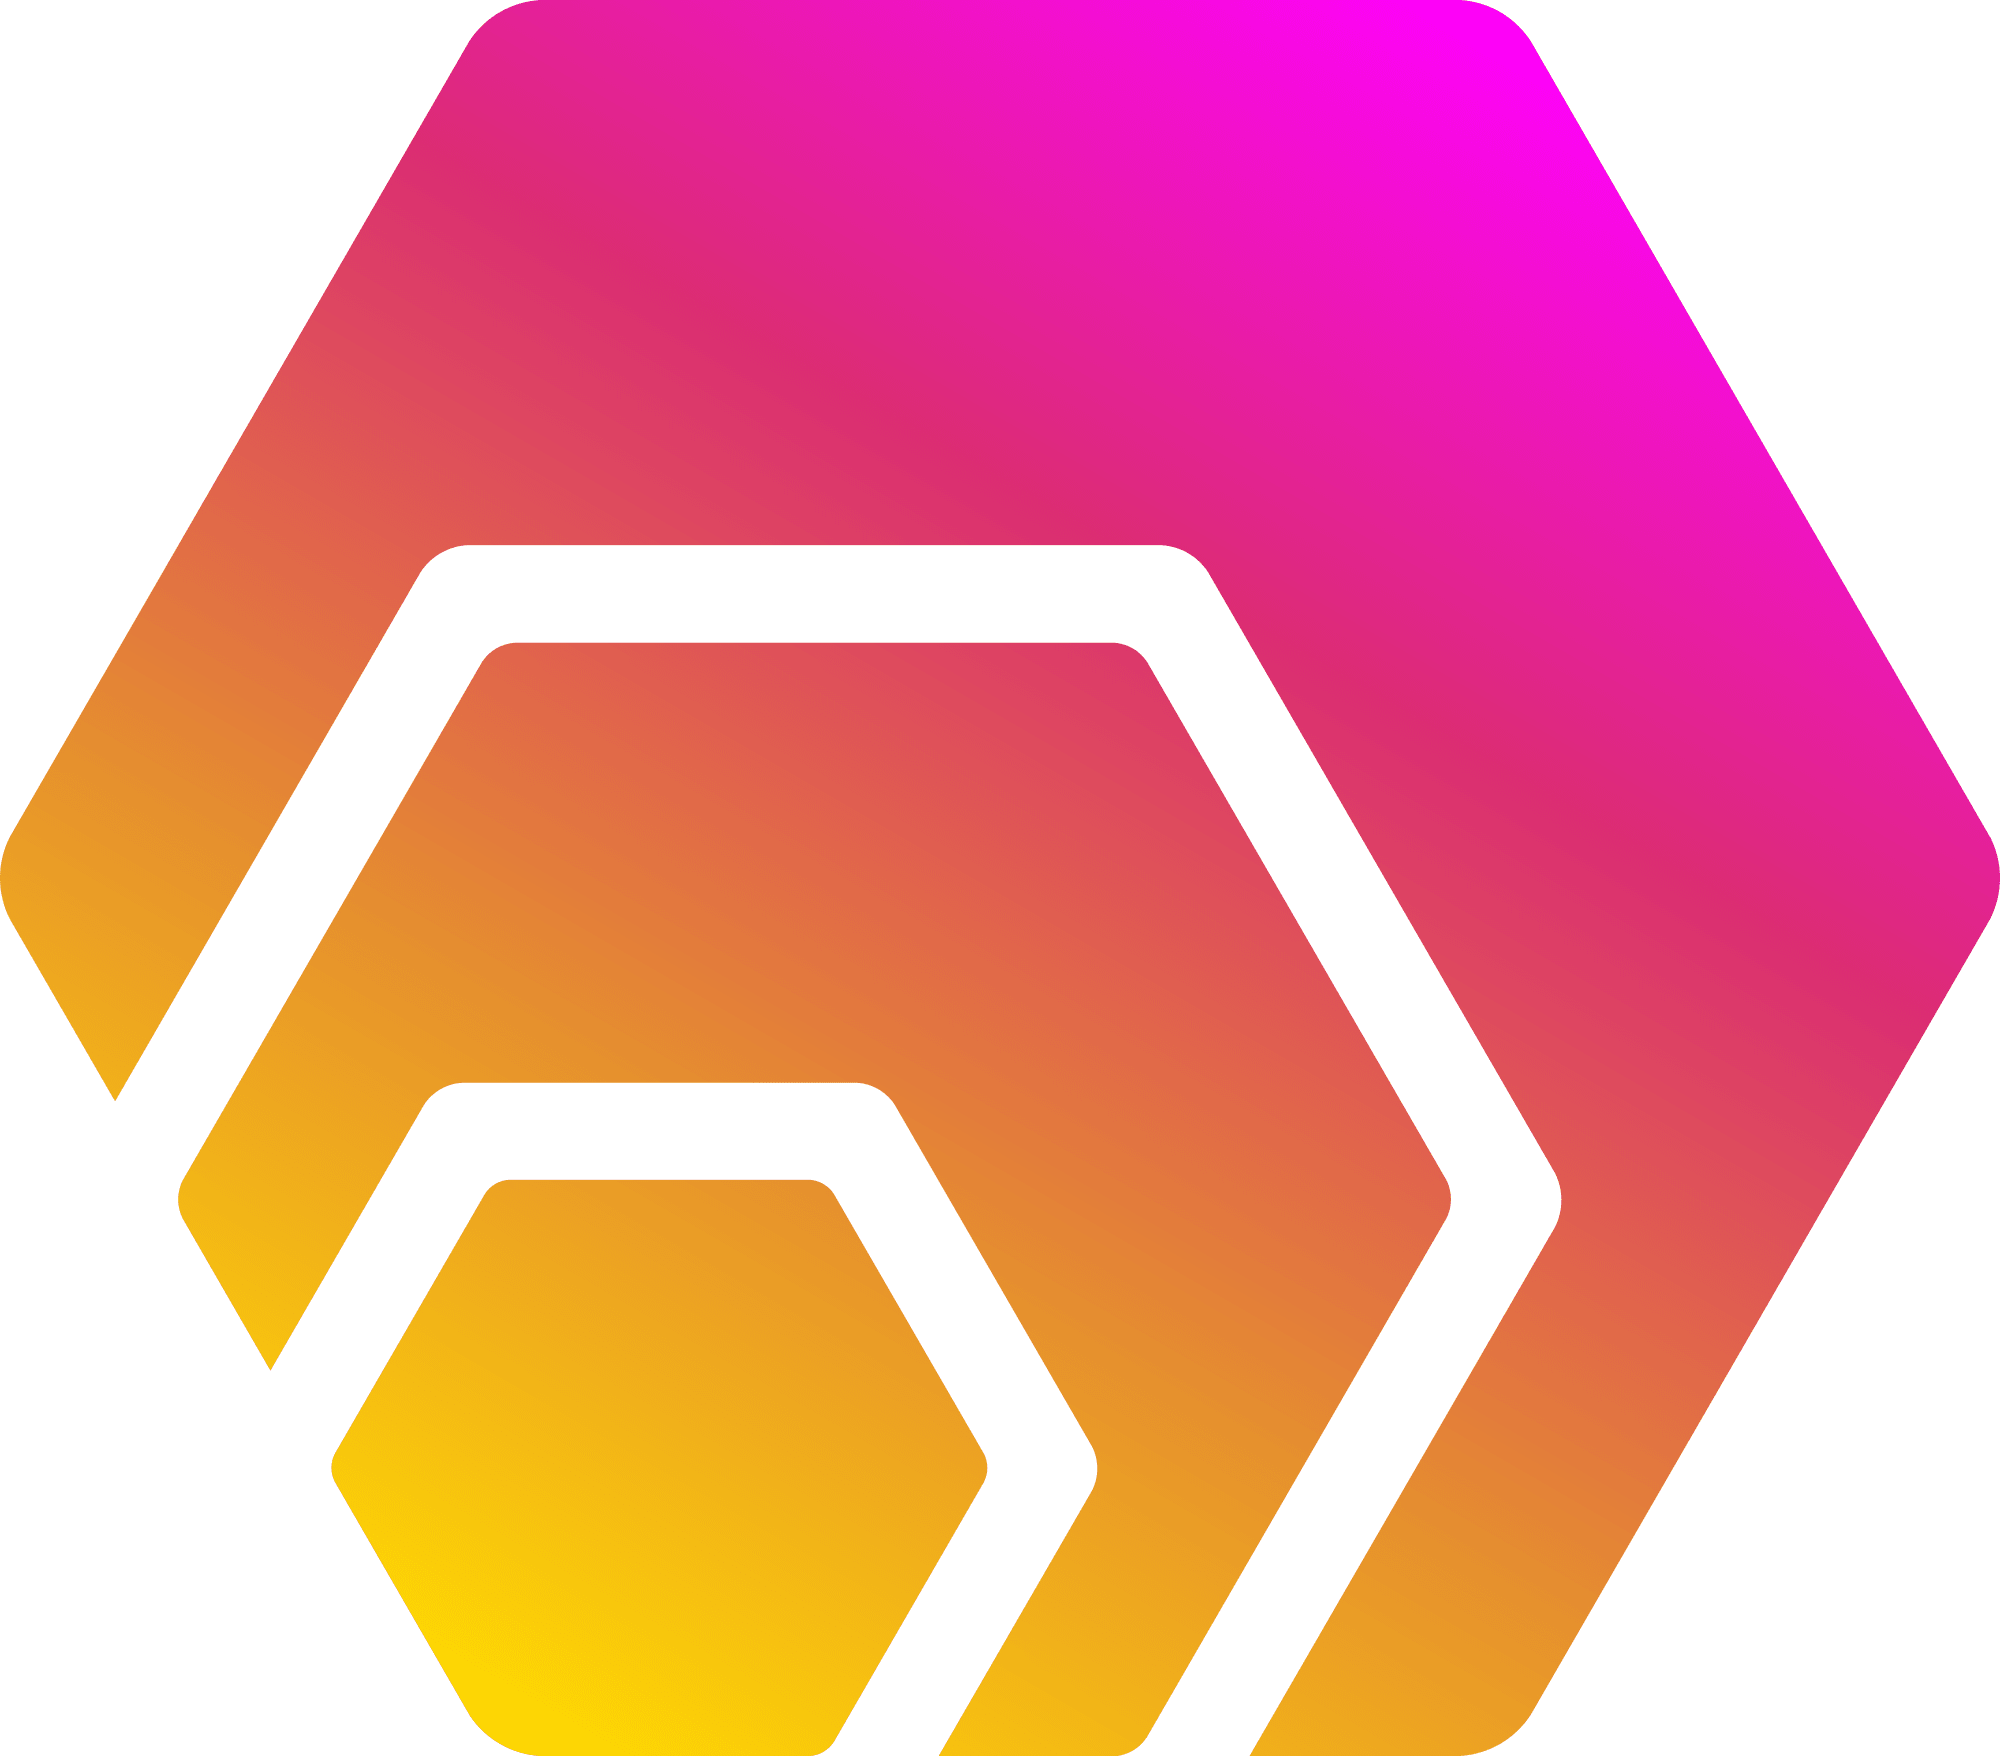 HEX logo in png format